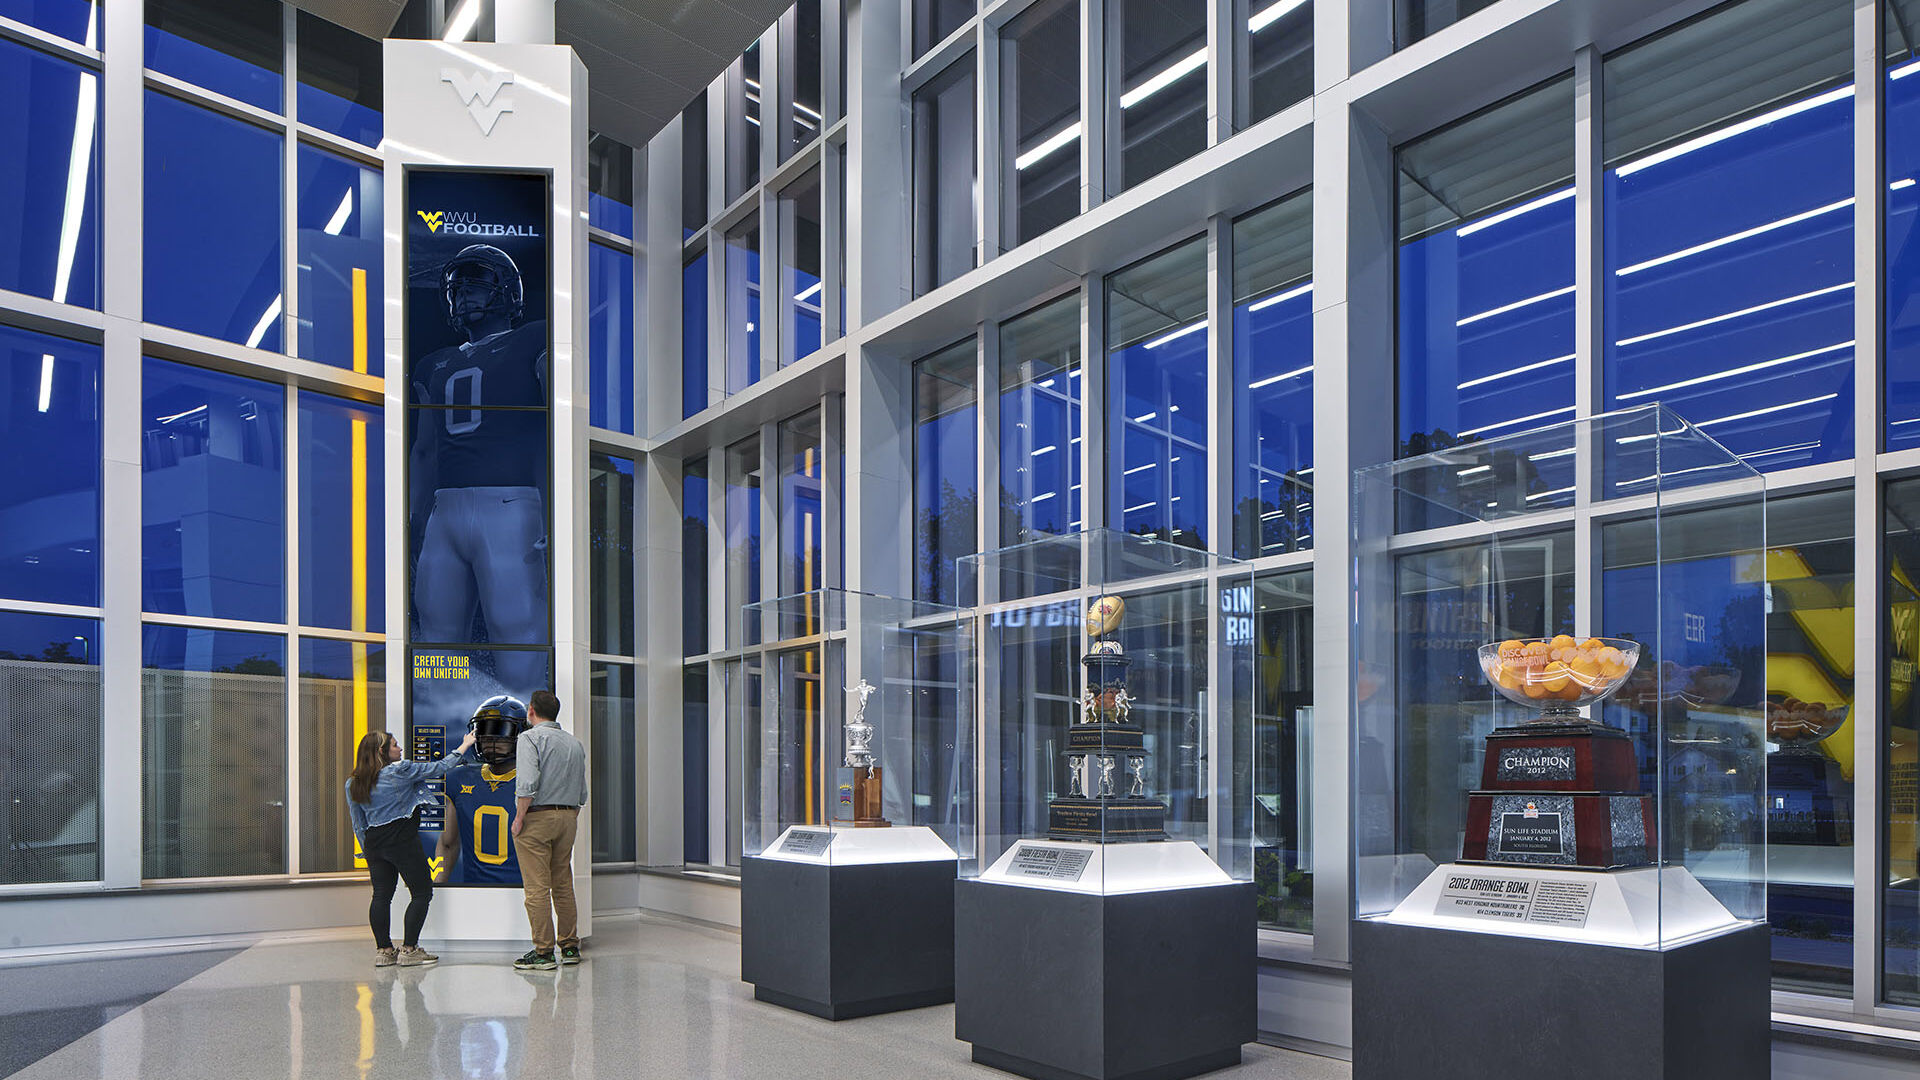 Man and woman use digital interactive display at the West Virginia Football Hall of Traditions